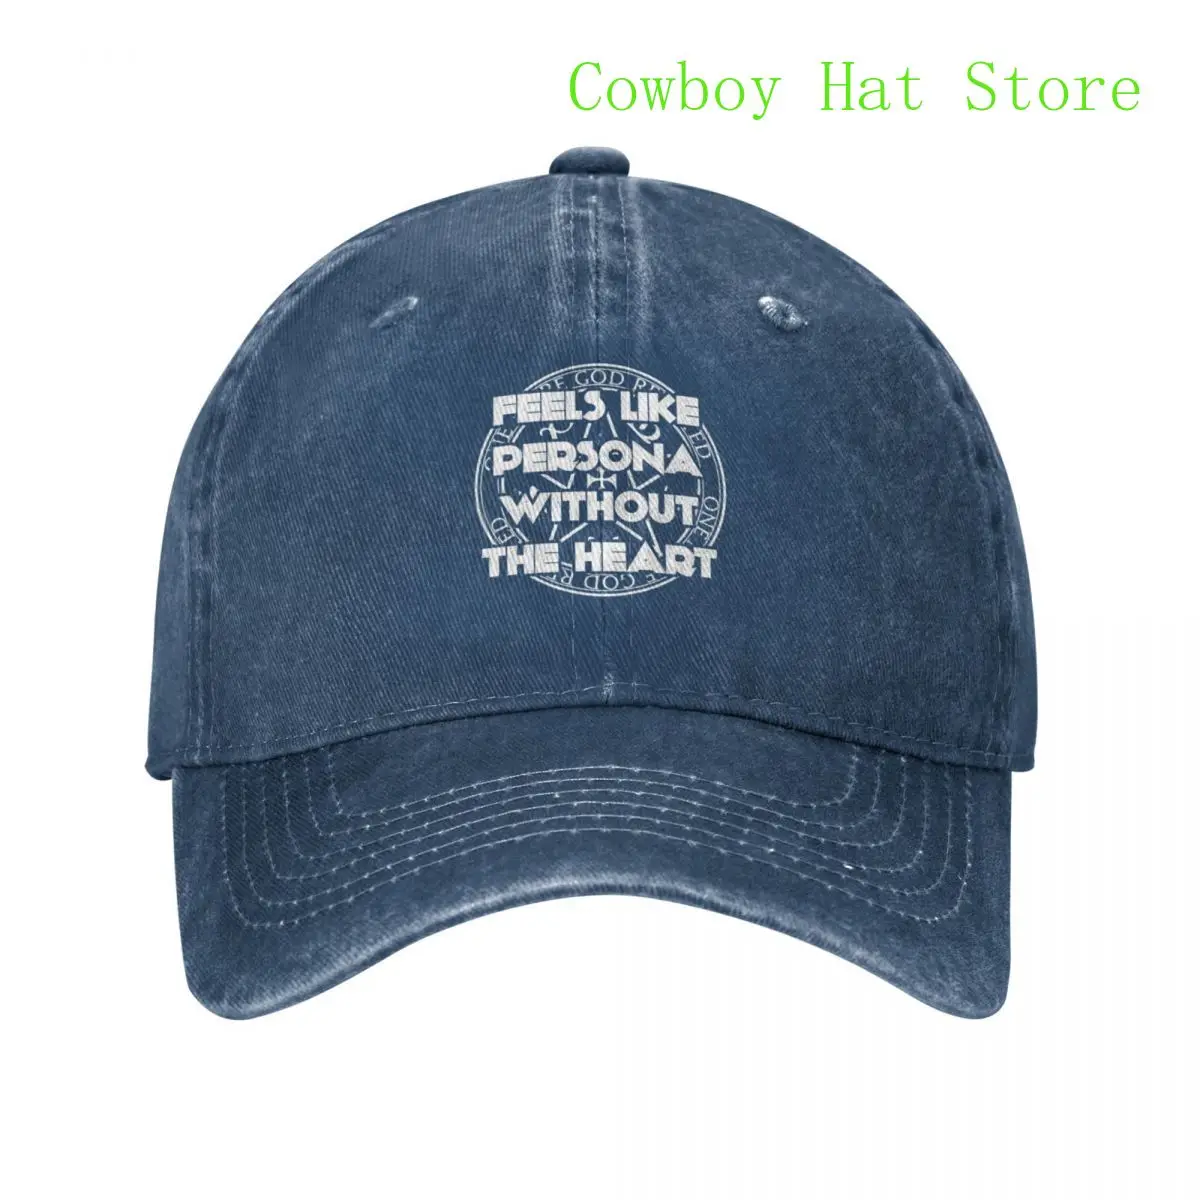 

Best Feels like persona without the heart Baseball Cap Hat Man For The Sun Rugby Boy Cap Women'S